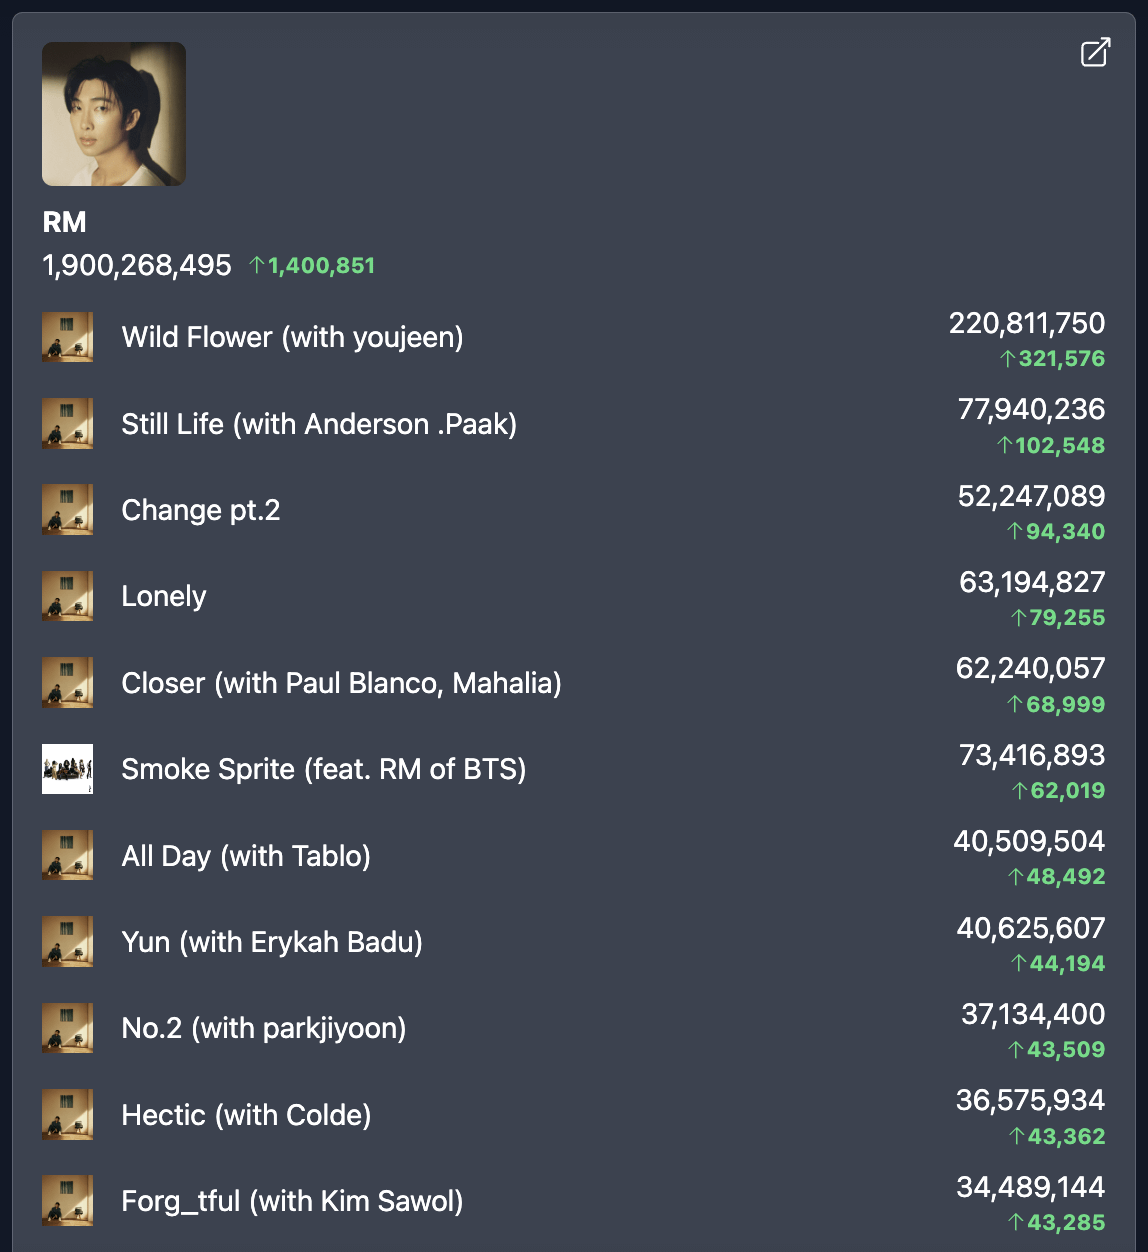 240506 RM has gained 1.9 billion streams on his Spotify profile